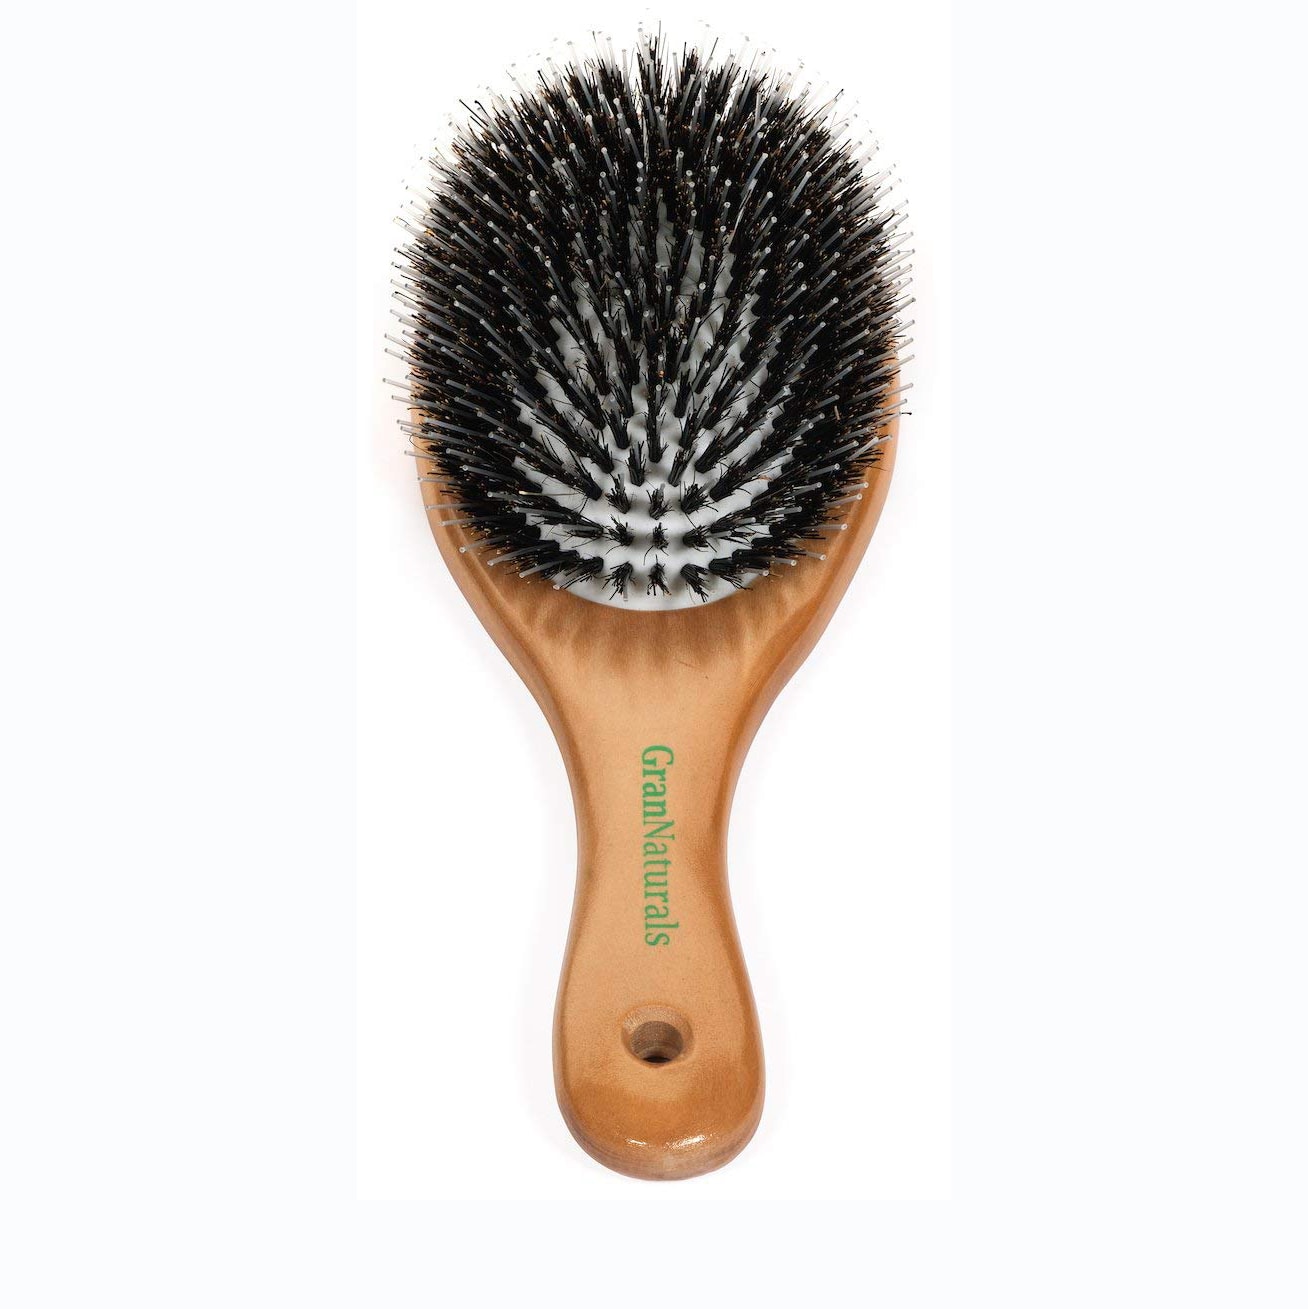 What type of hair brush is best for your hair?